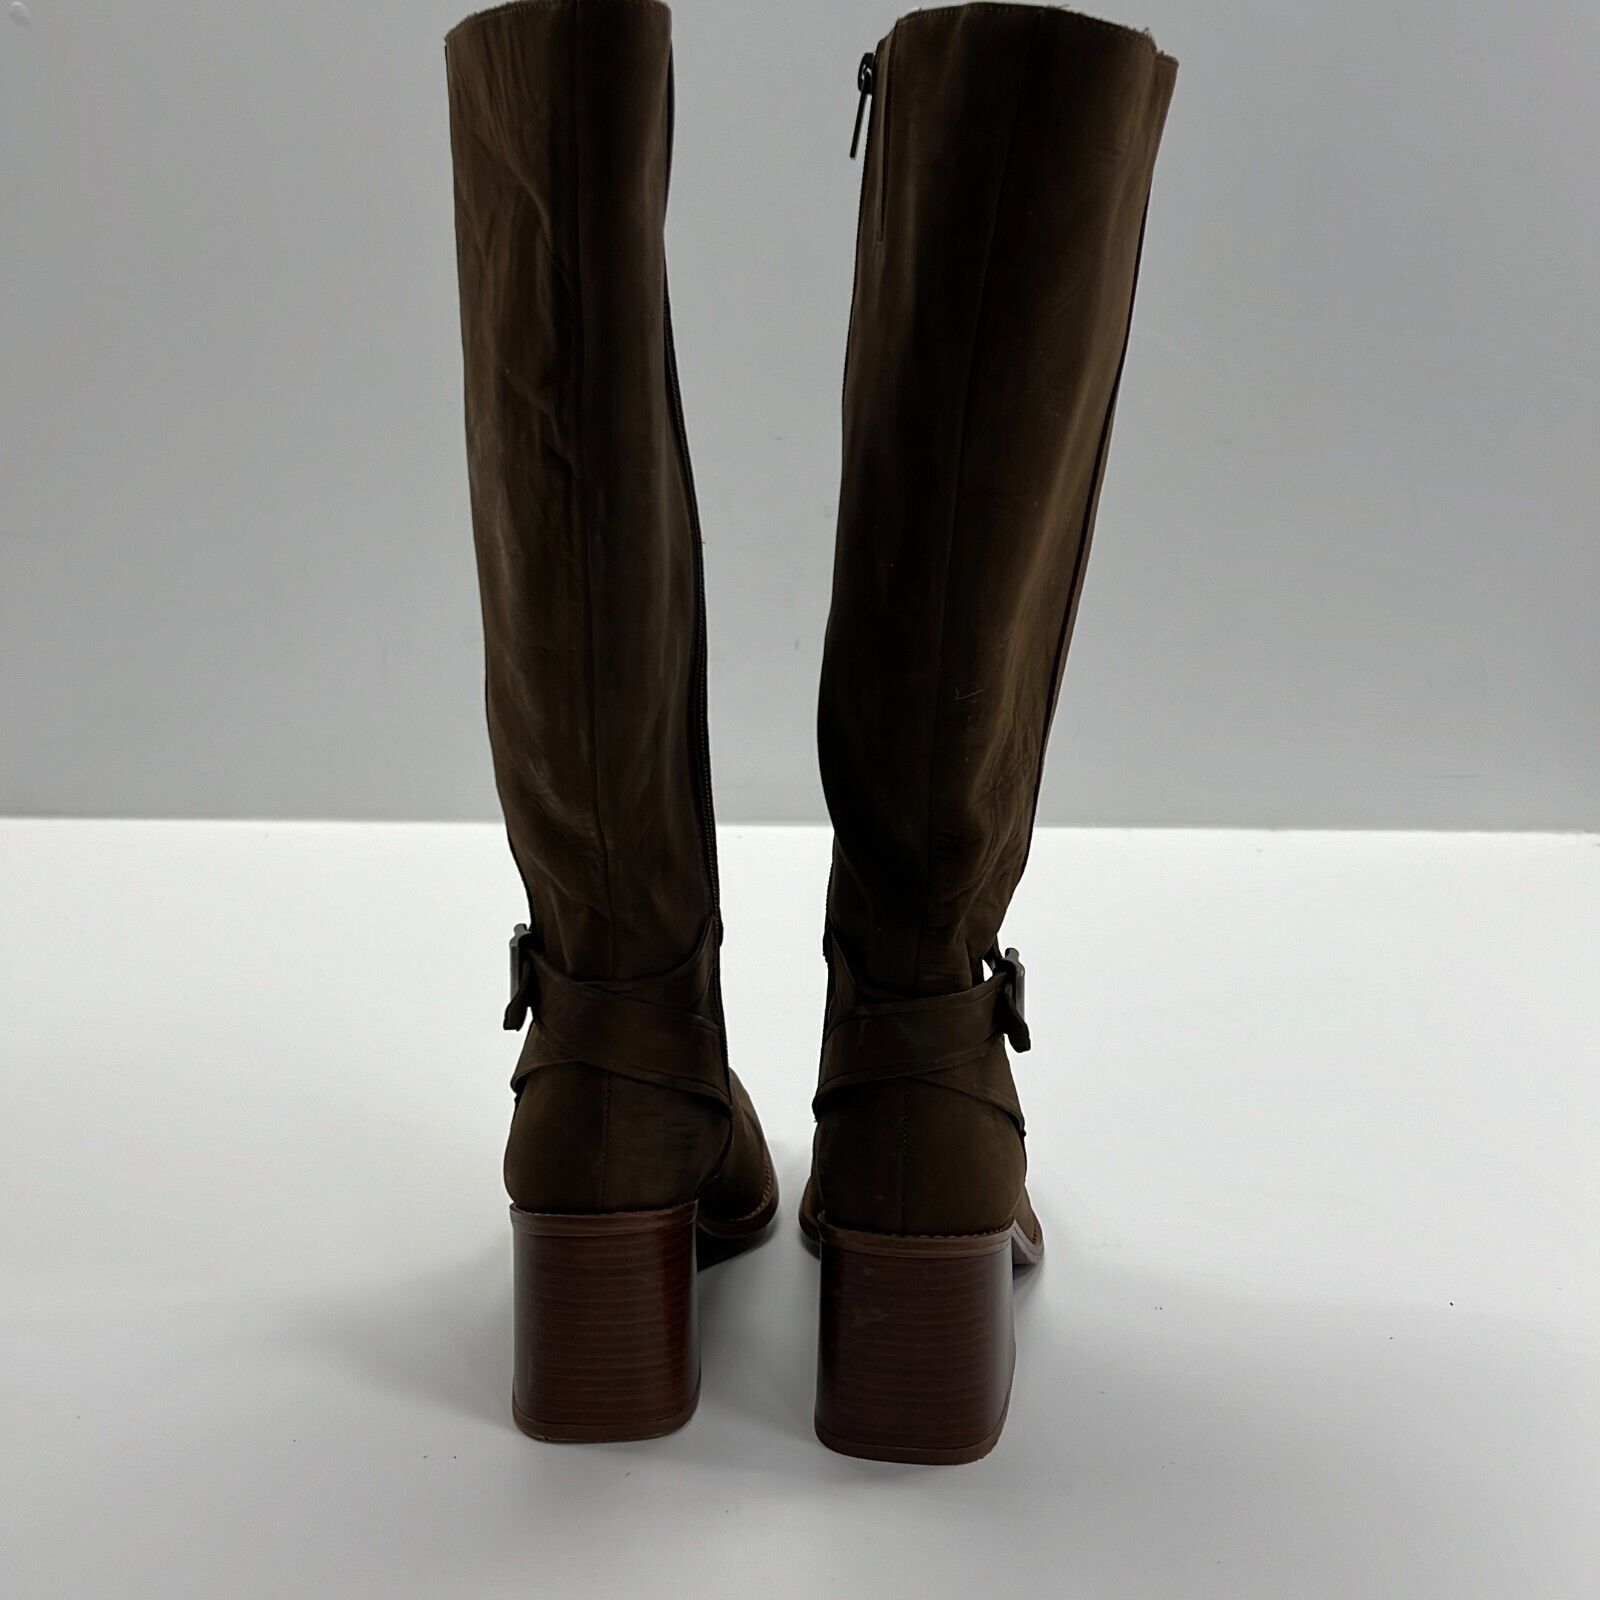 Vince Camuto Women's Seshlyan Brown Leather Knee High Tall Riding Boots Size 9W